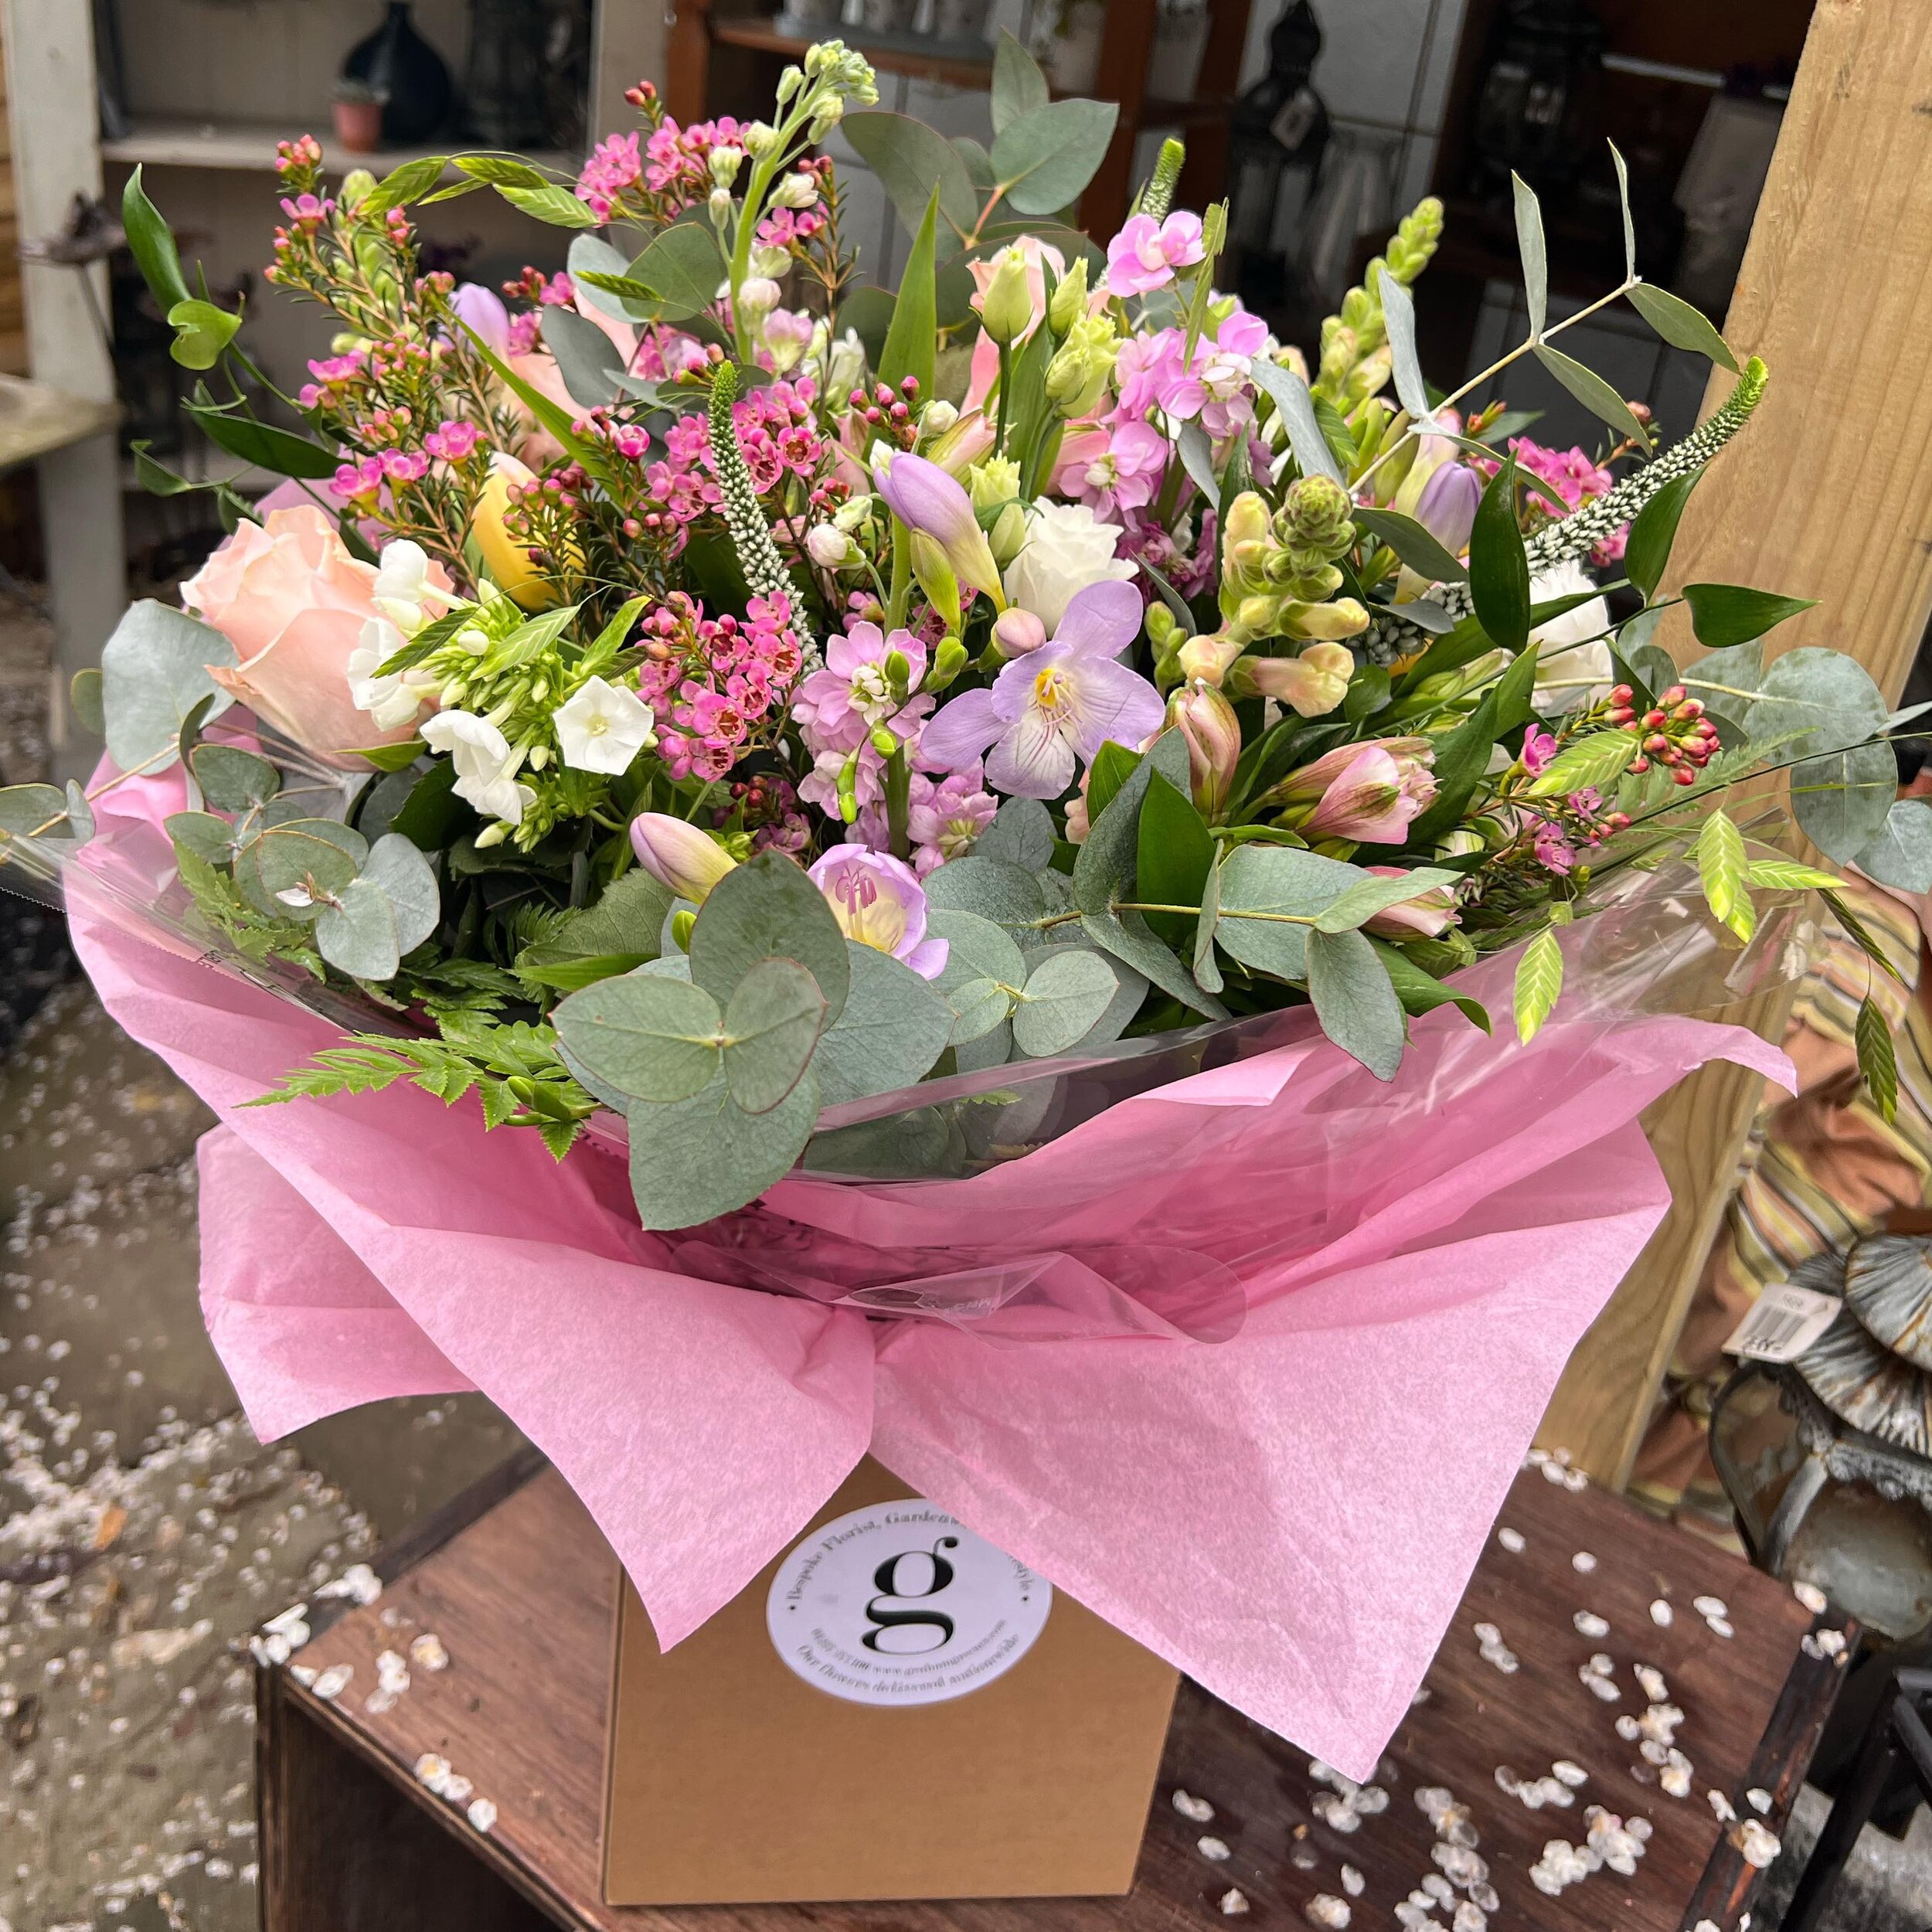 Treat your Mum to a gorgeous &lsquo;bouquet in a box&rsquo; and have it delivered straight to her door this Mother&rsquo;s Day!🌸 Order now Online or over the phone 
01227277100 💖
#mothersday #motheringsunday #florist #bouquet #flowers #whitstable #